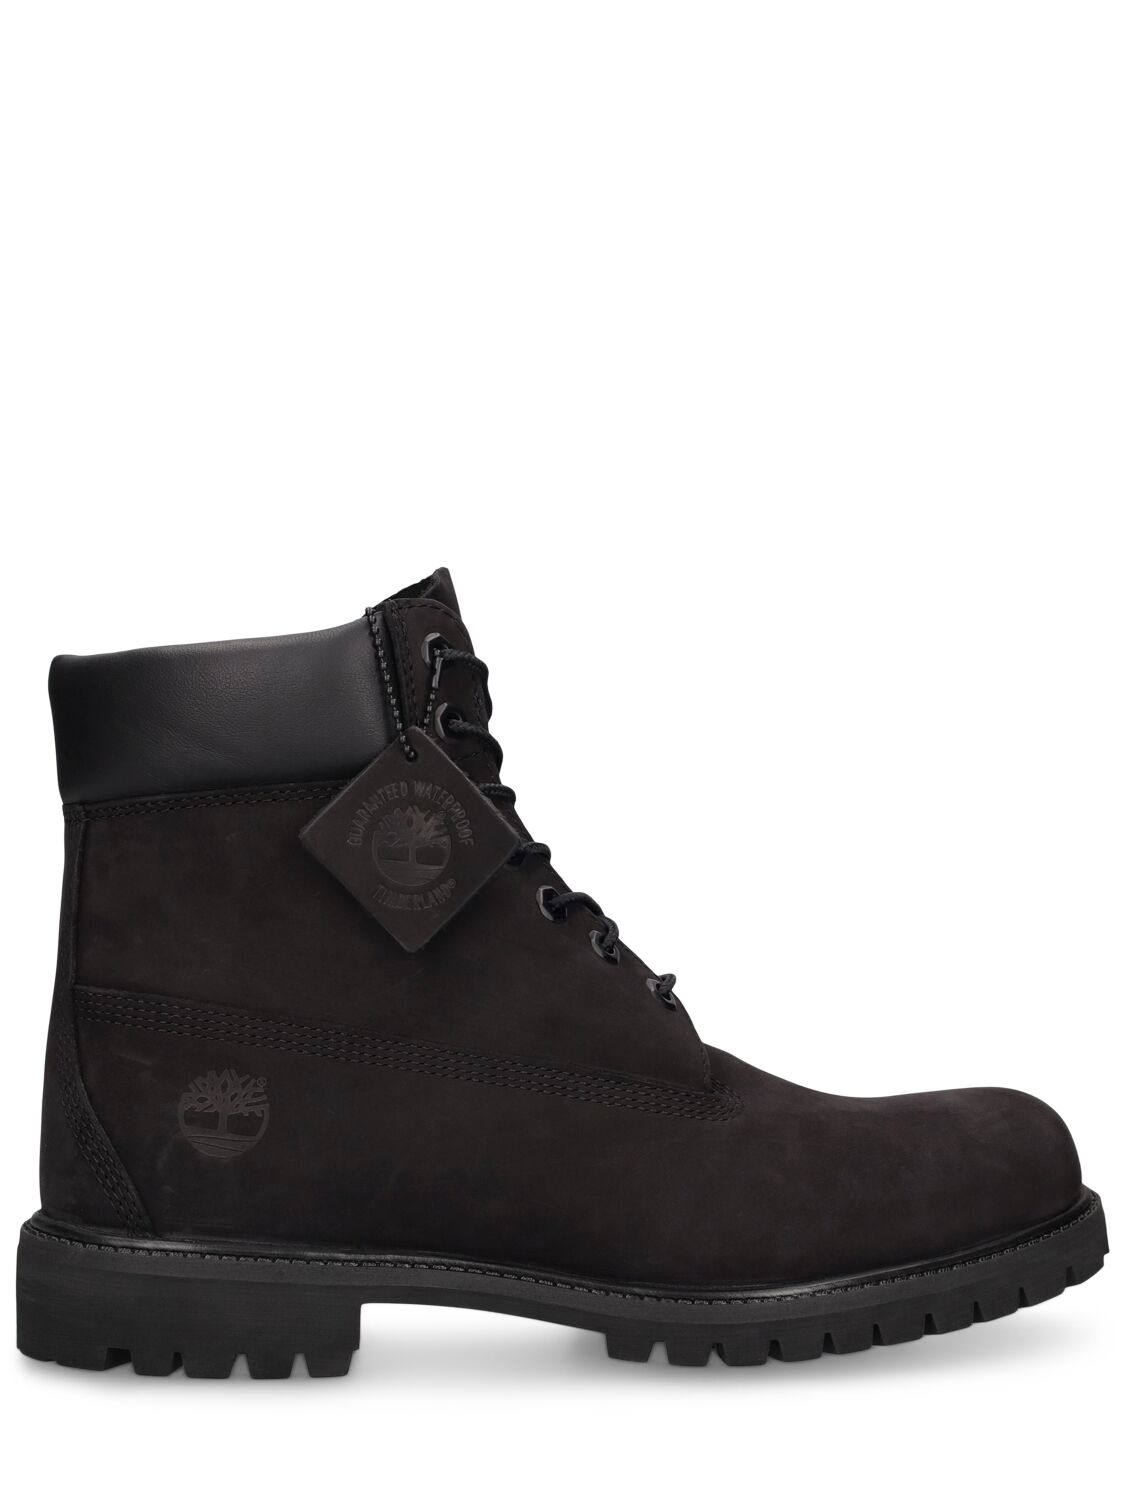 Timberland 6 Inch Premium Waterproof Lace-up Boots In Black